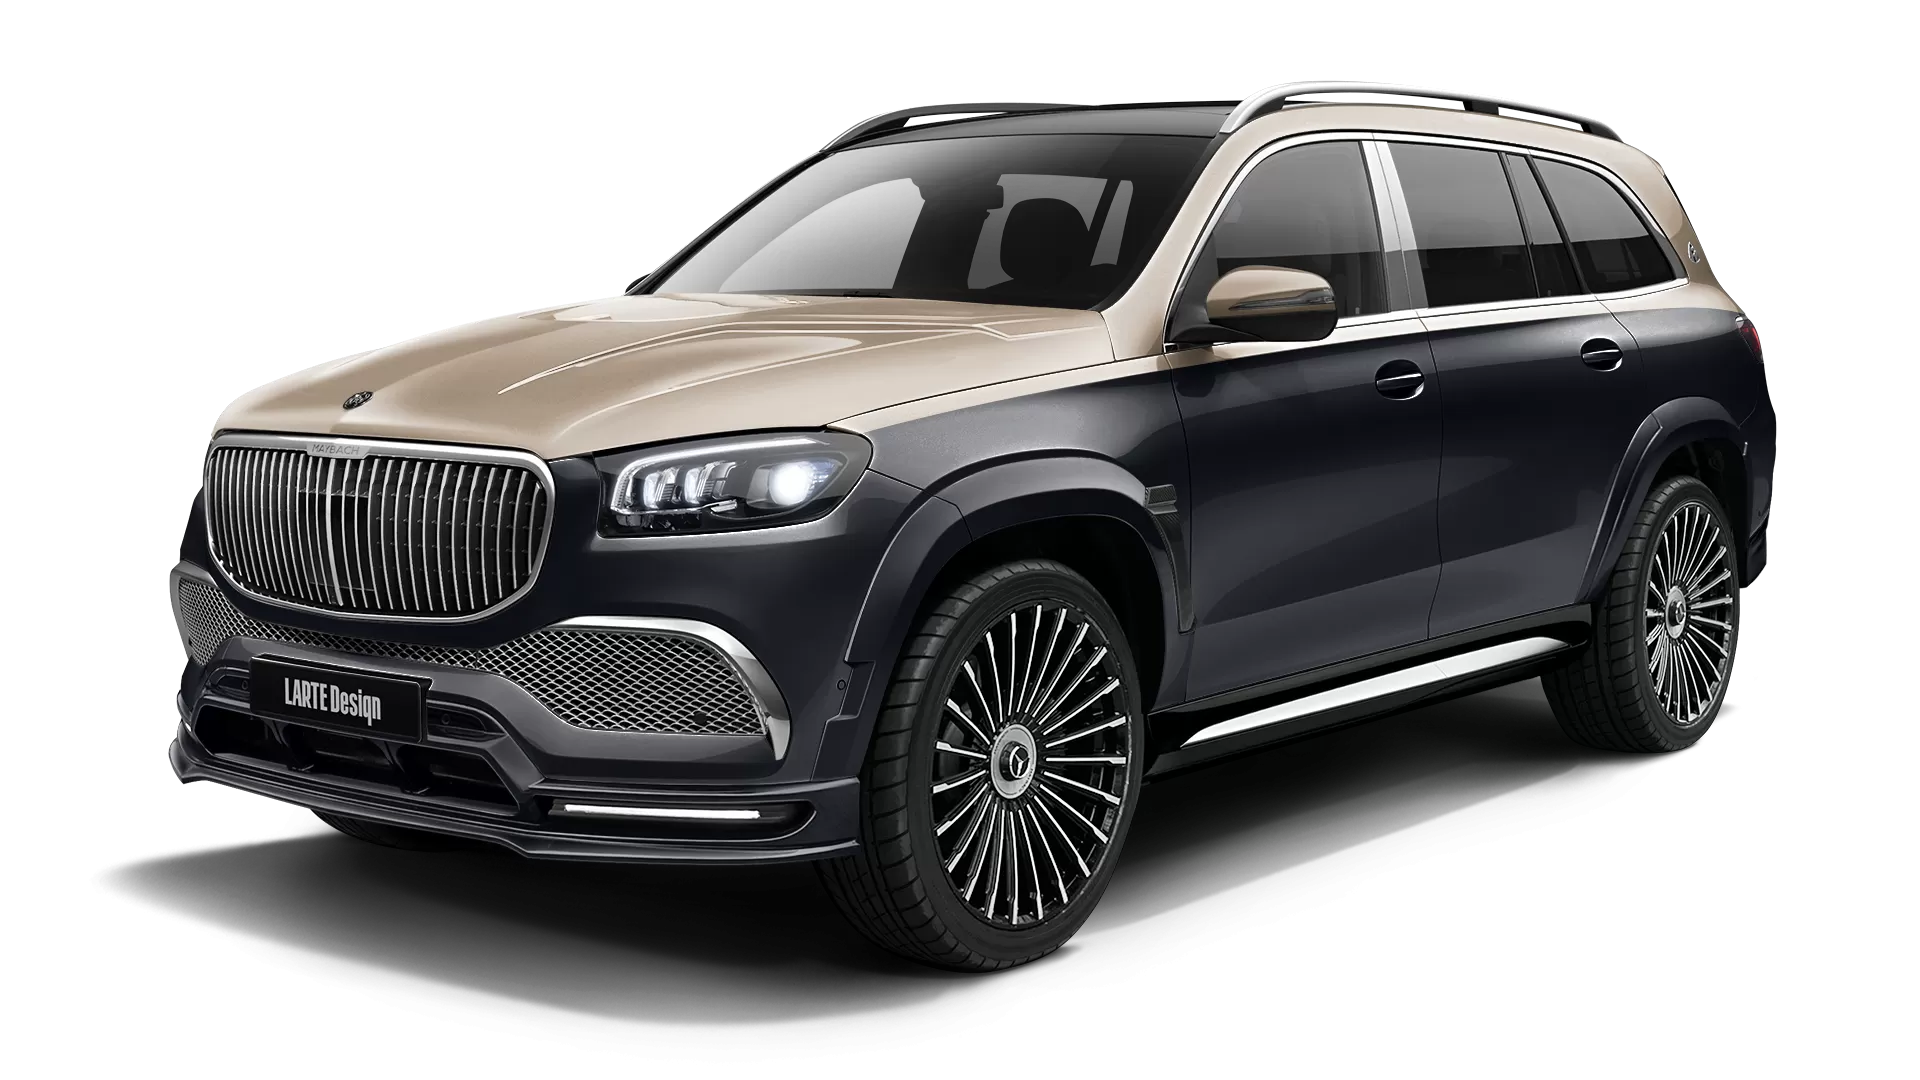 Mercedes Maybach GLS 600 with painted body kit: front view shown in Obsidian Black & Kalahari Gold